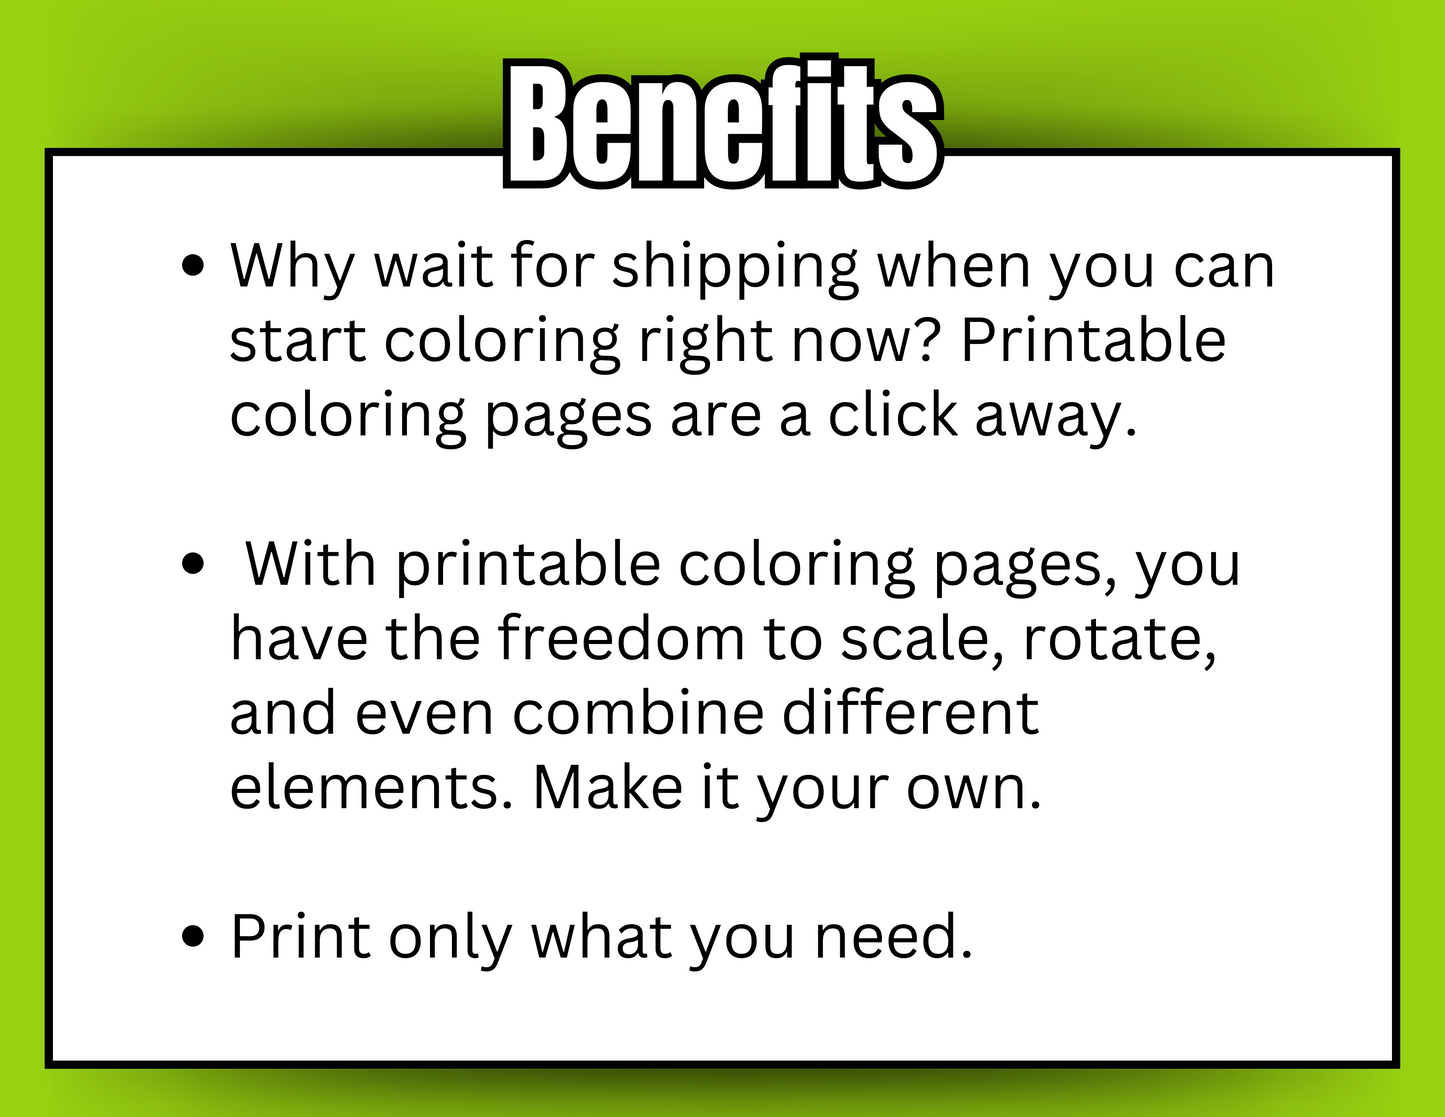 001-EB | PLR Coloring Pages, Prompt and a Bot | Pre-Black Friday Special for Small Business Owners